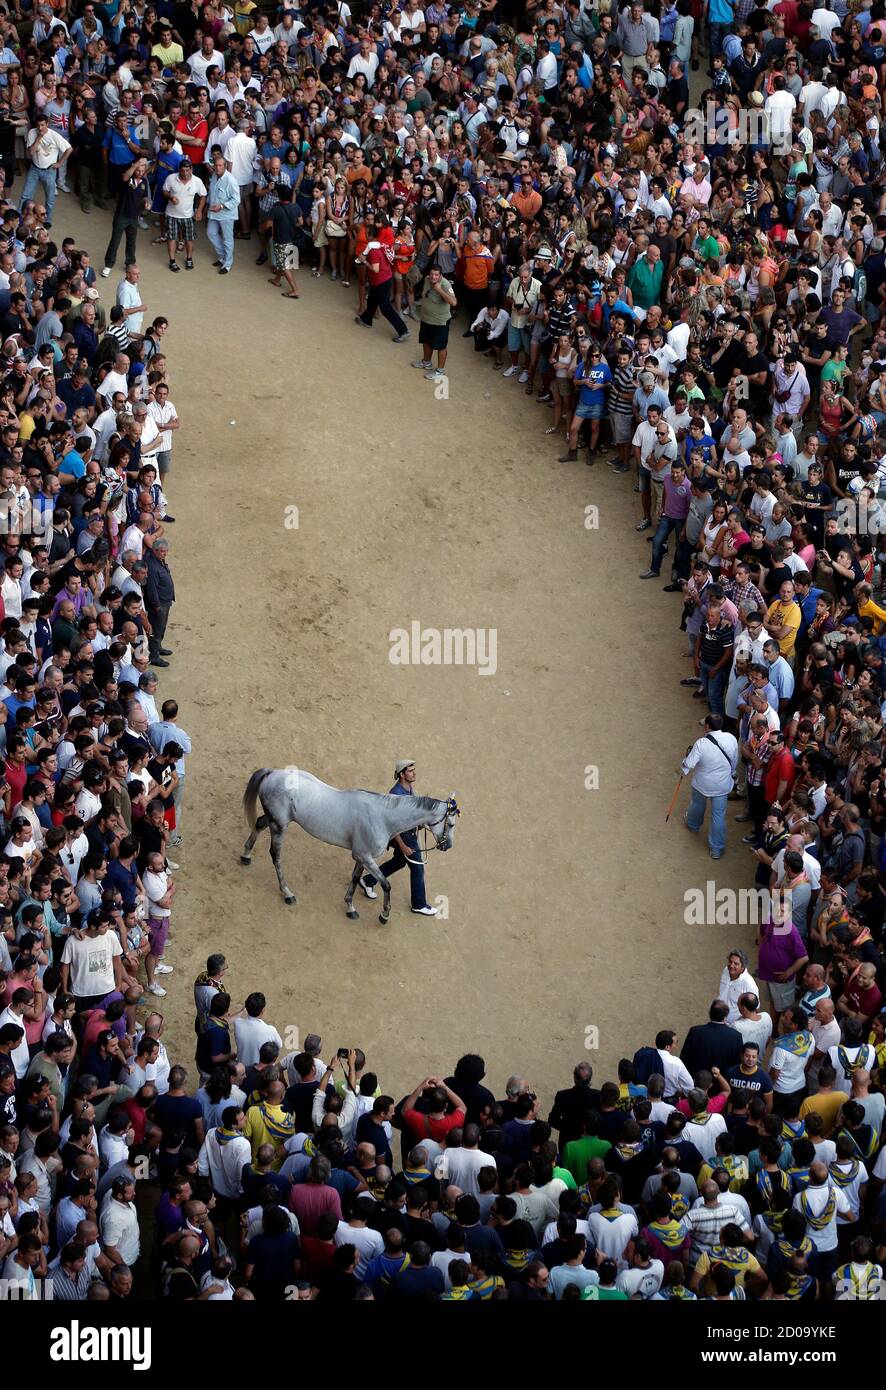 The horse of Tartuca parish is escorted by its groom after training session of the Palio race in Siena August 15, 2012. Every year on August 16, almost without fail since the mid-1600s, 10 riders compete bareback around Siena's shell-shaped central square in a bid to win the Palio, a silk banner depicting the Madonna and child. REUTERS/Alessandro Bianchi (ITALY - Tags: SOCIETY ANIMALS SPORT HORSE RACING TPX IMAGES OF THE DAY) Stock Photo